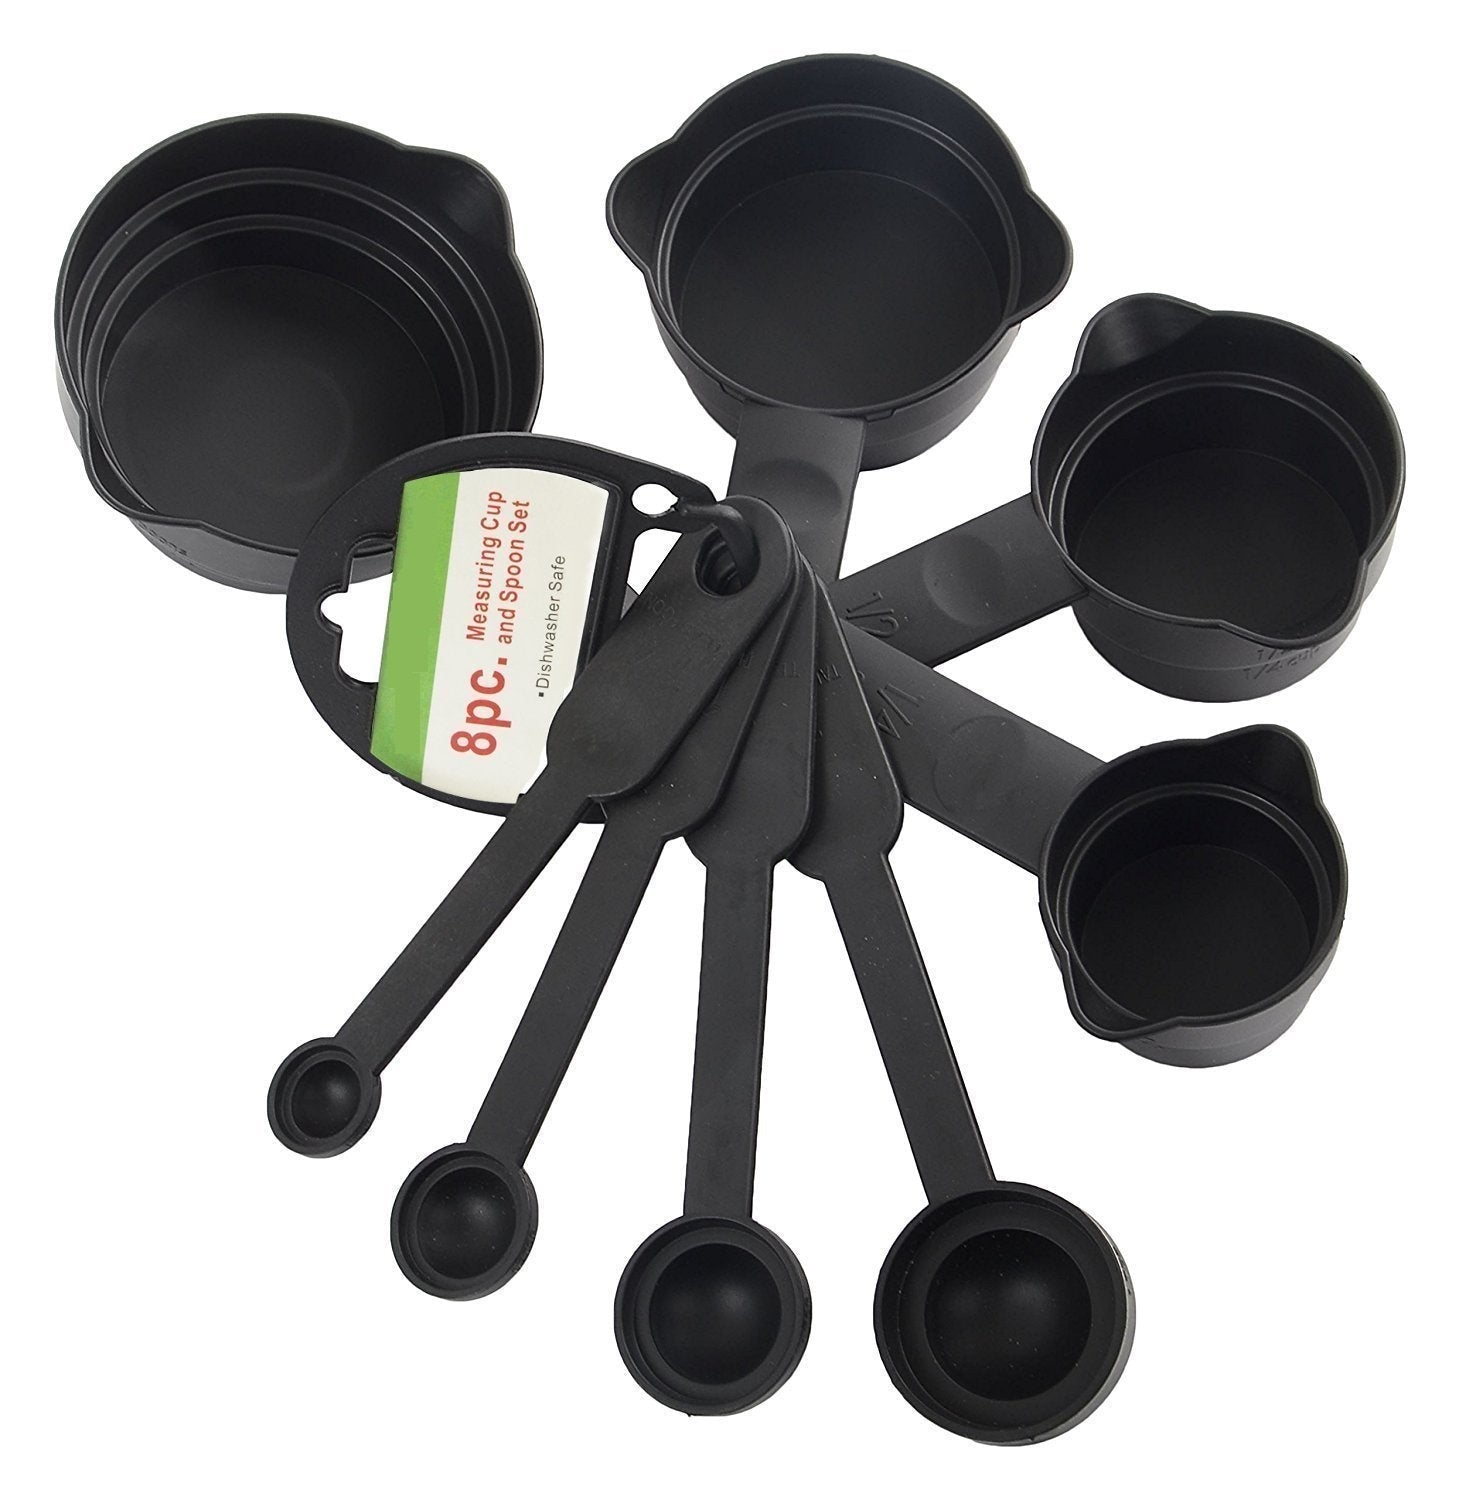 106 Plastic Measuring Cups and Spoons (8 Pcs, Black) Home Care Gadgets